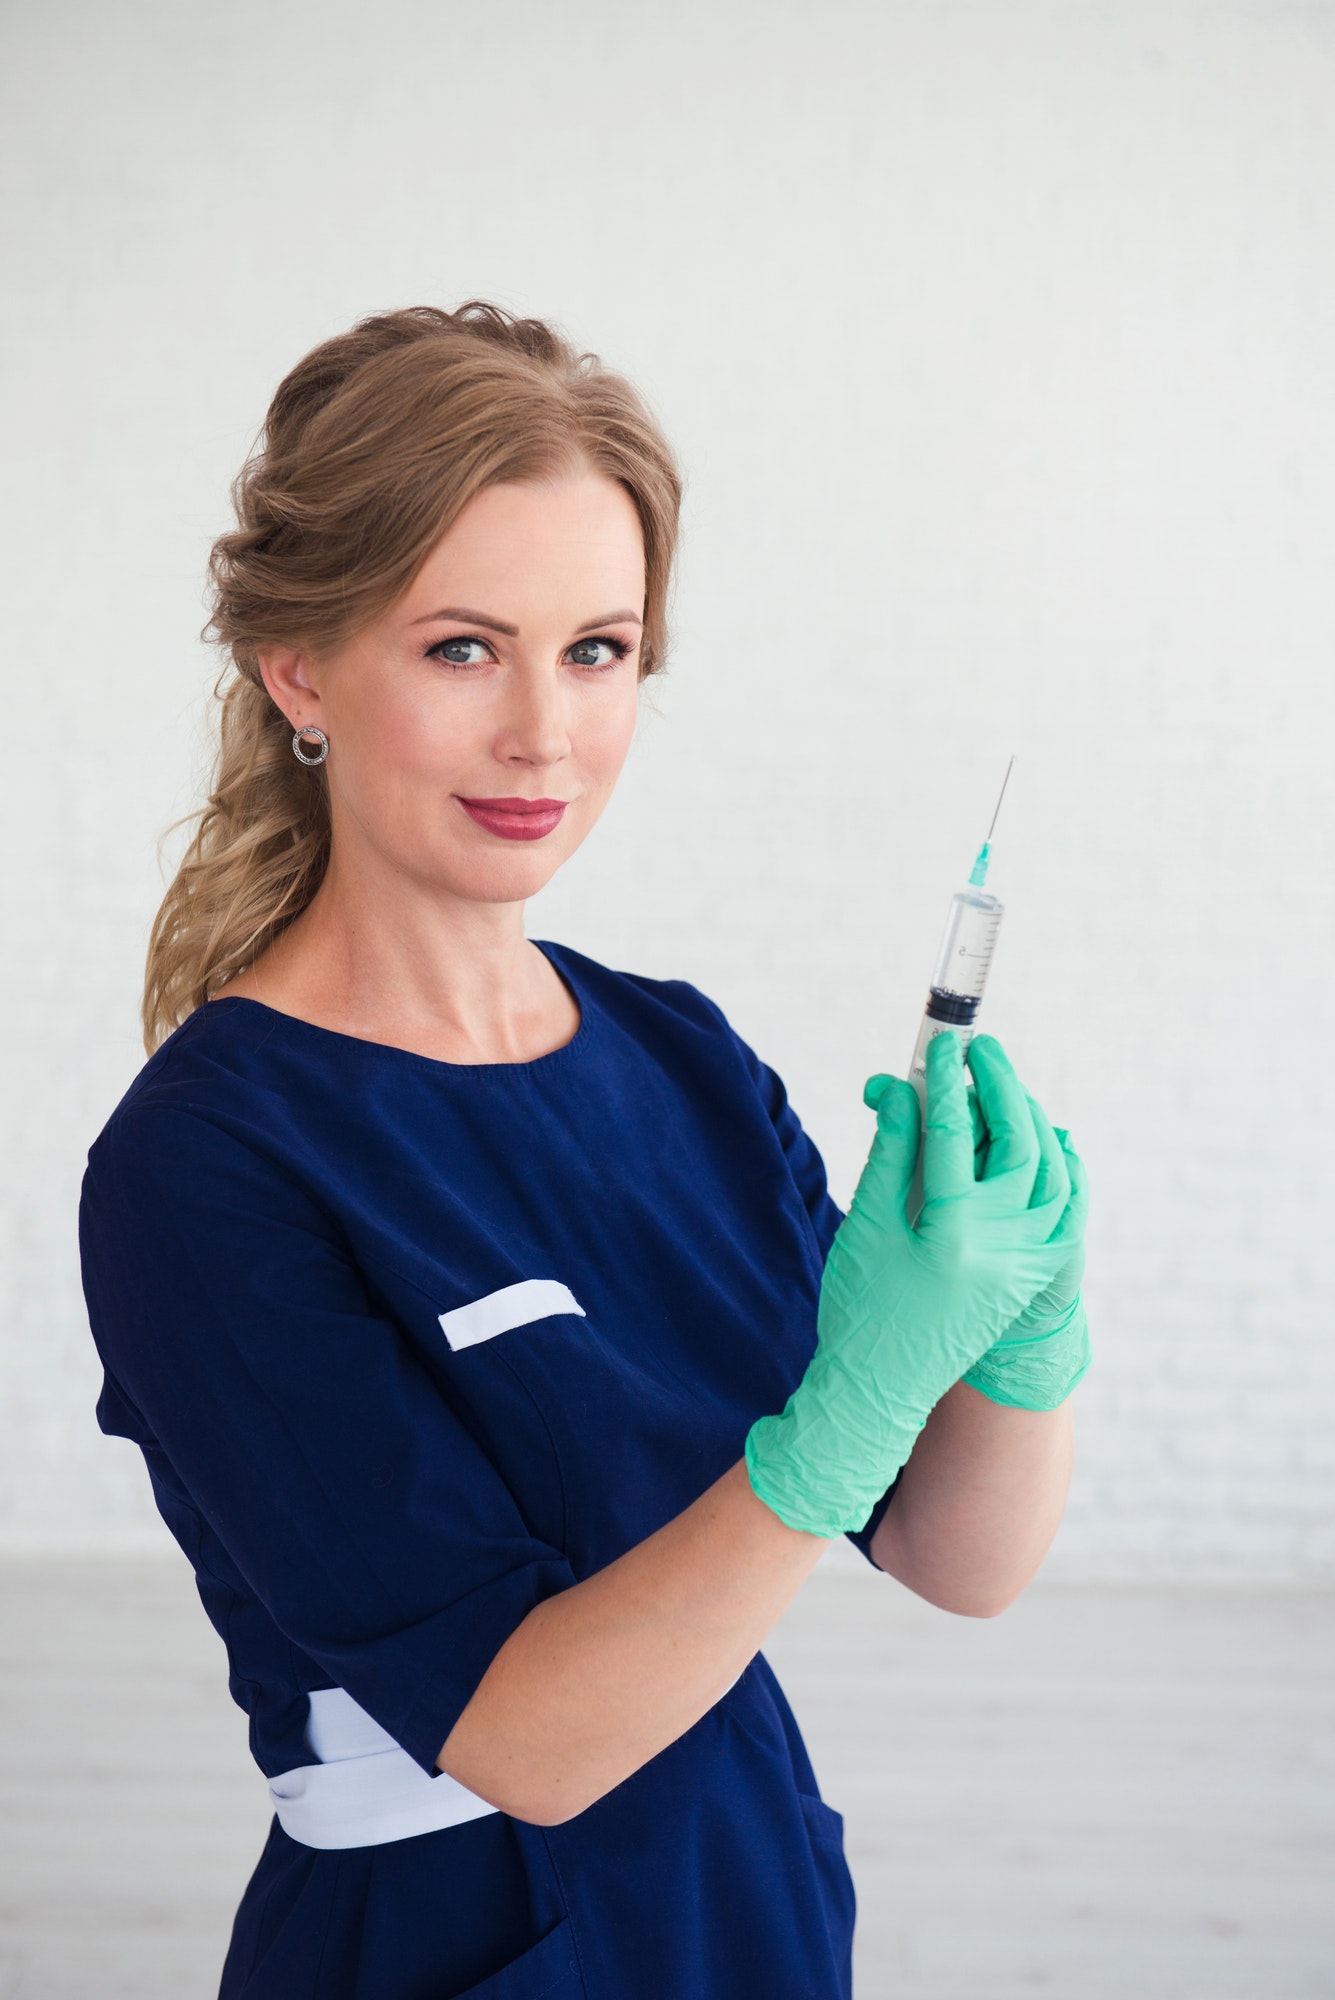 young-woman-cosmetologist-in-blue-uniform-holding-syringe-beauty-face-injection.jpg